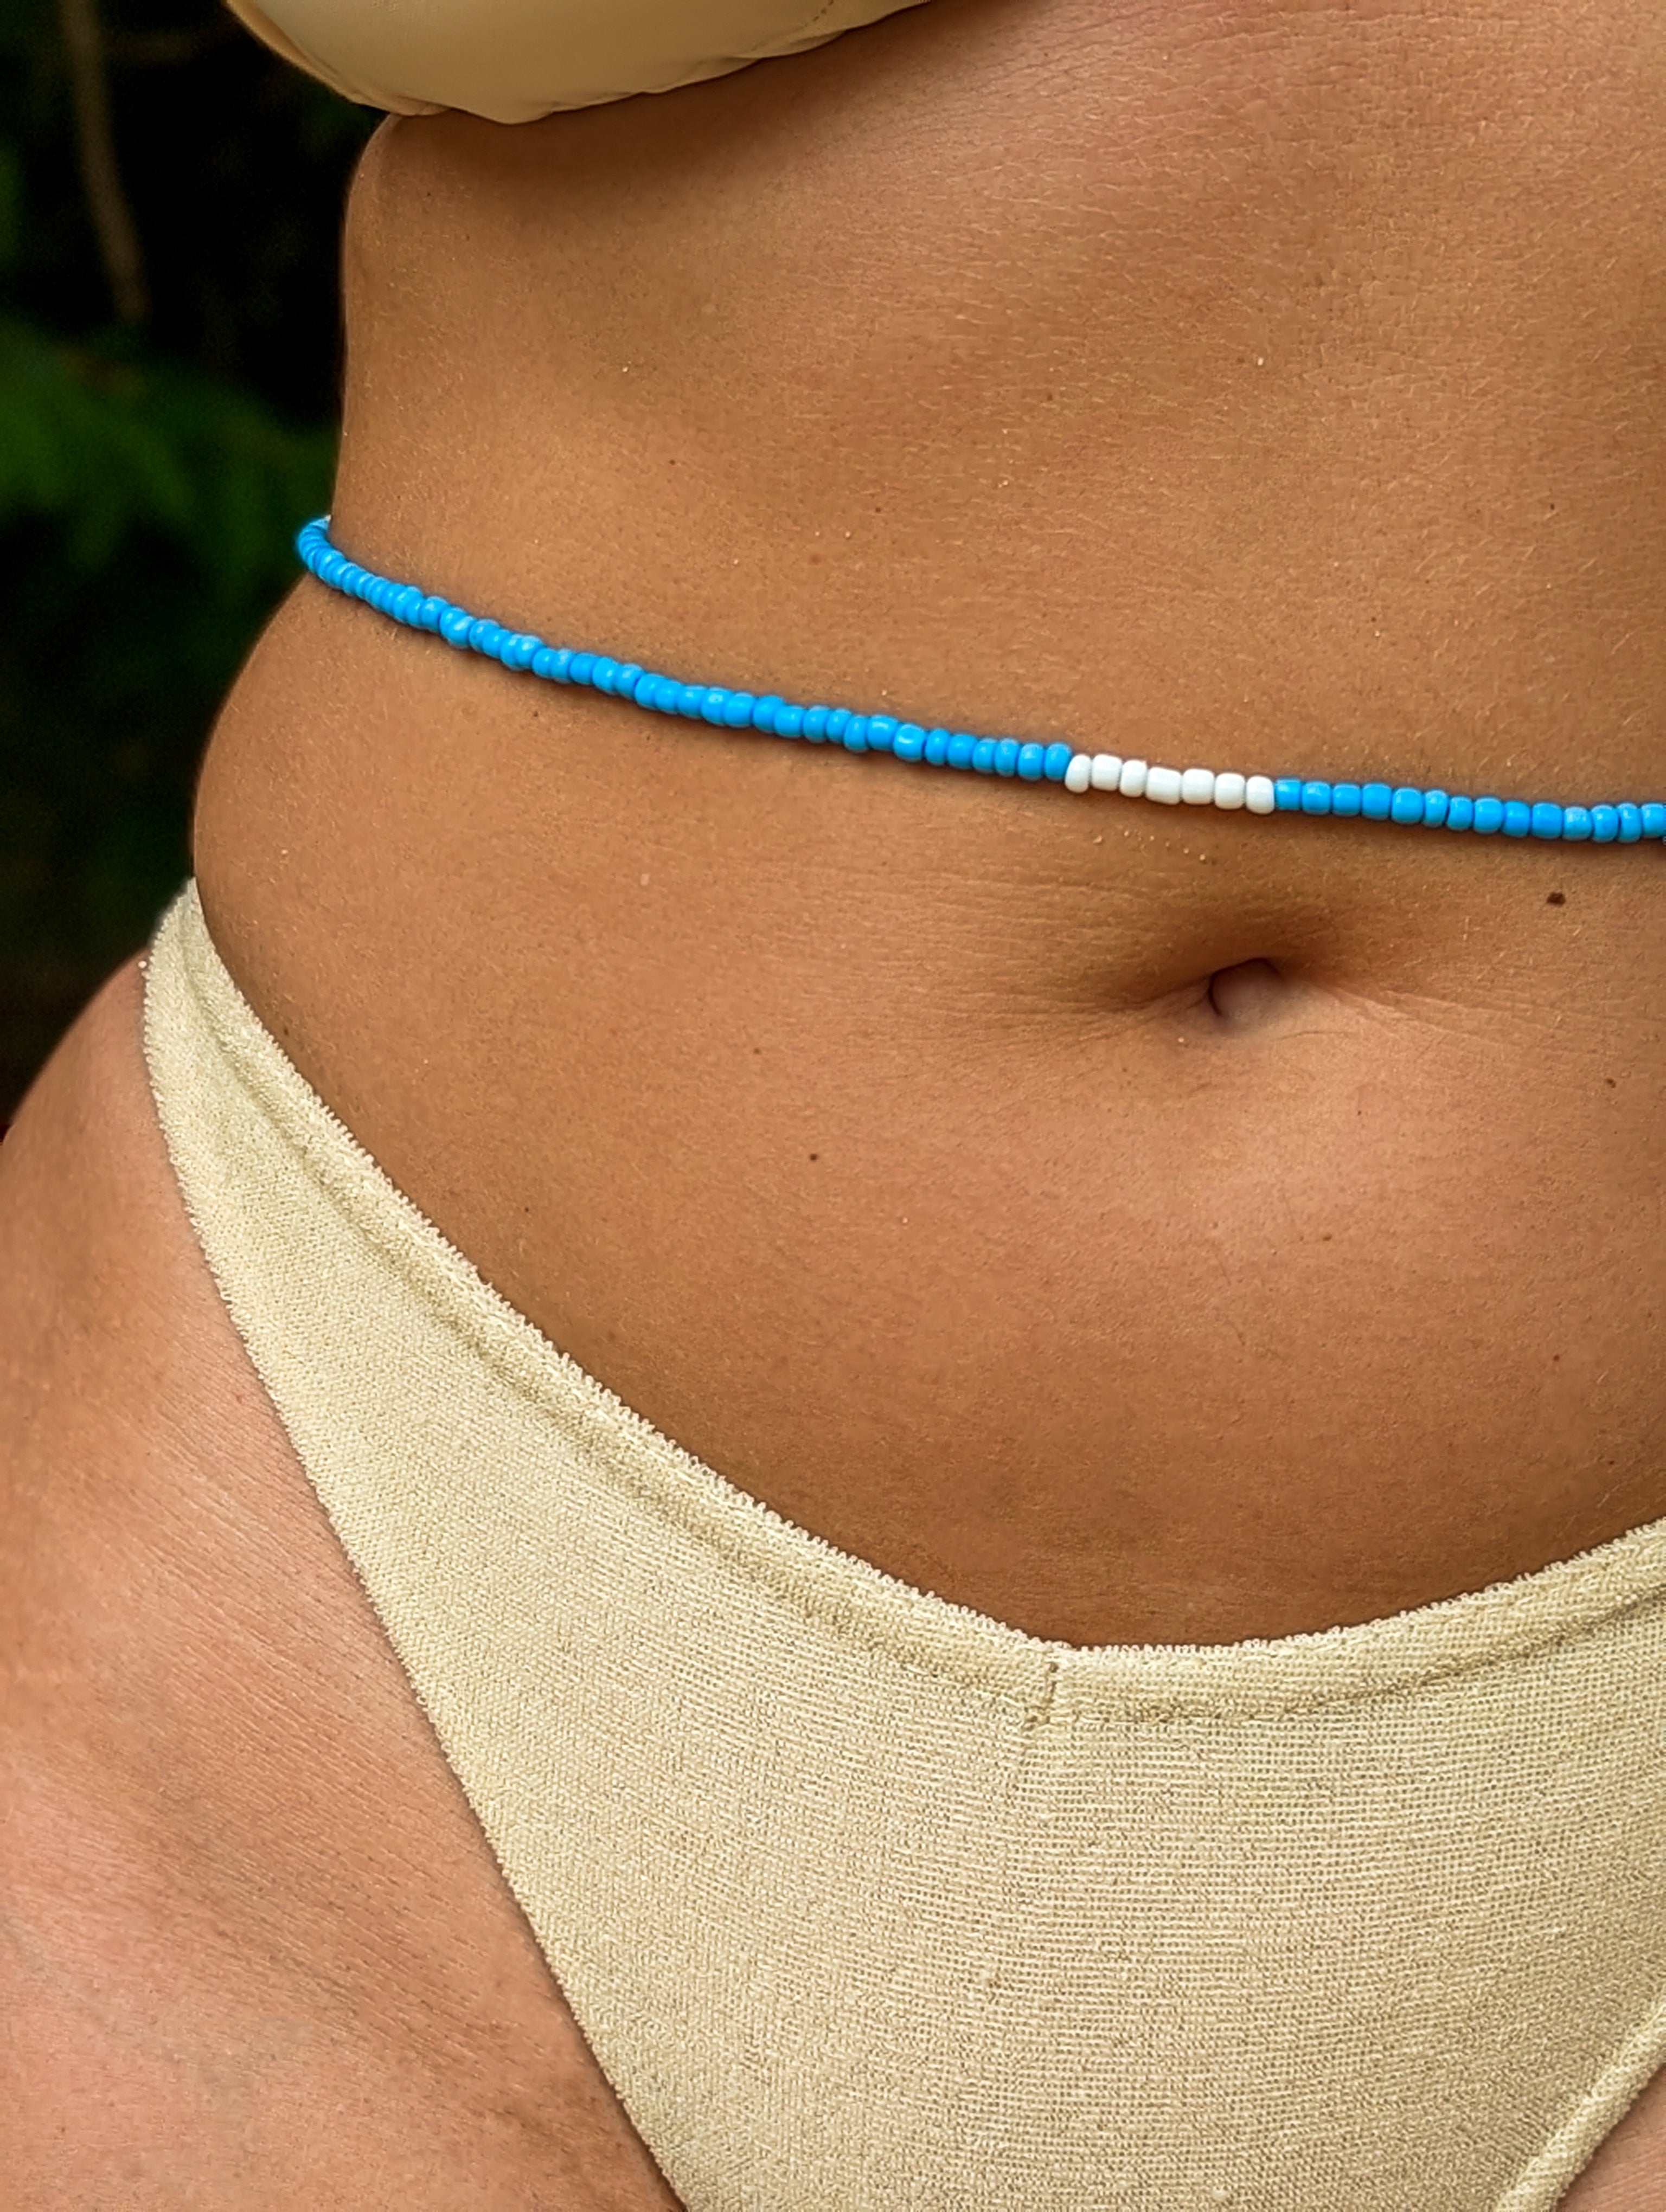 [THE FIFTY FIVE] Belly Chain: Blue/White [Large Beads]